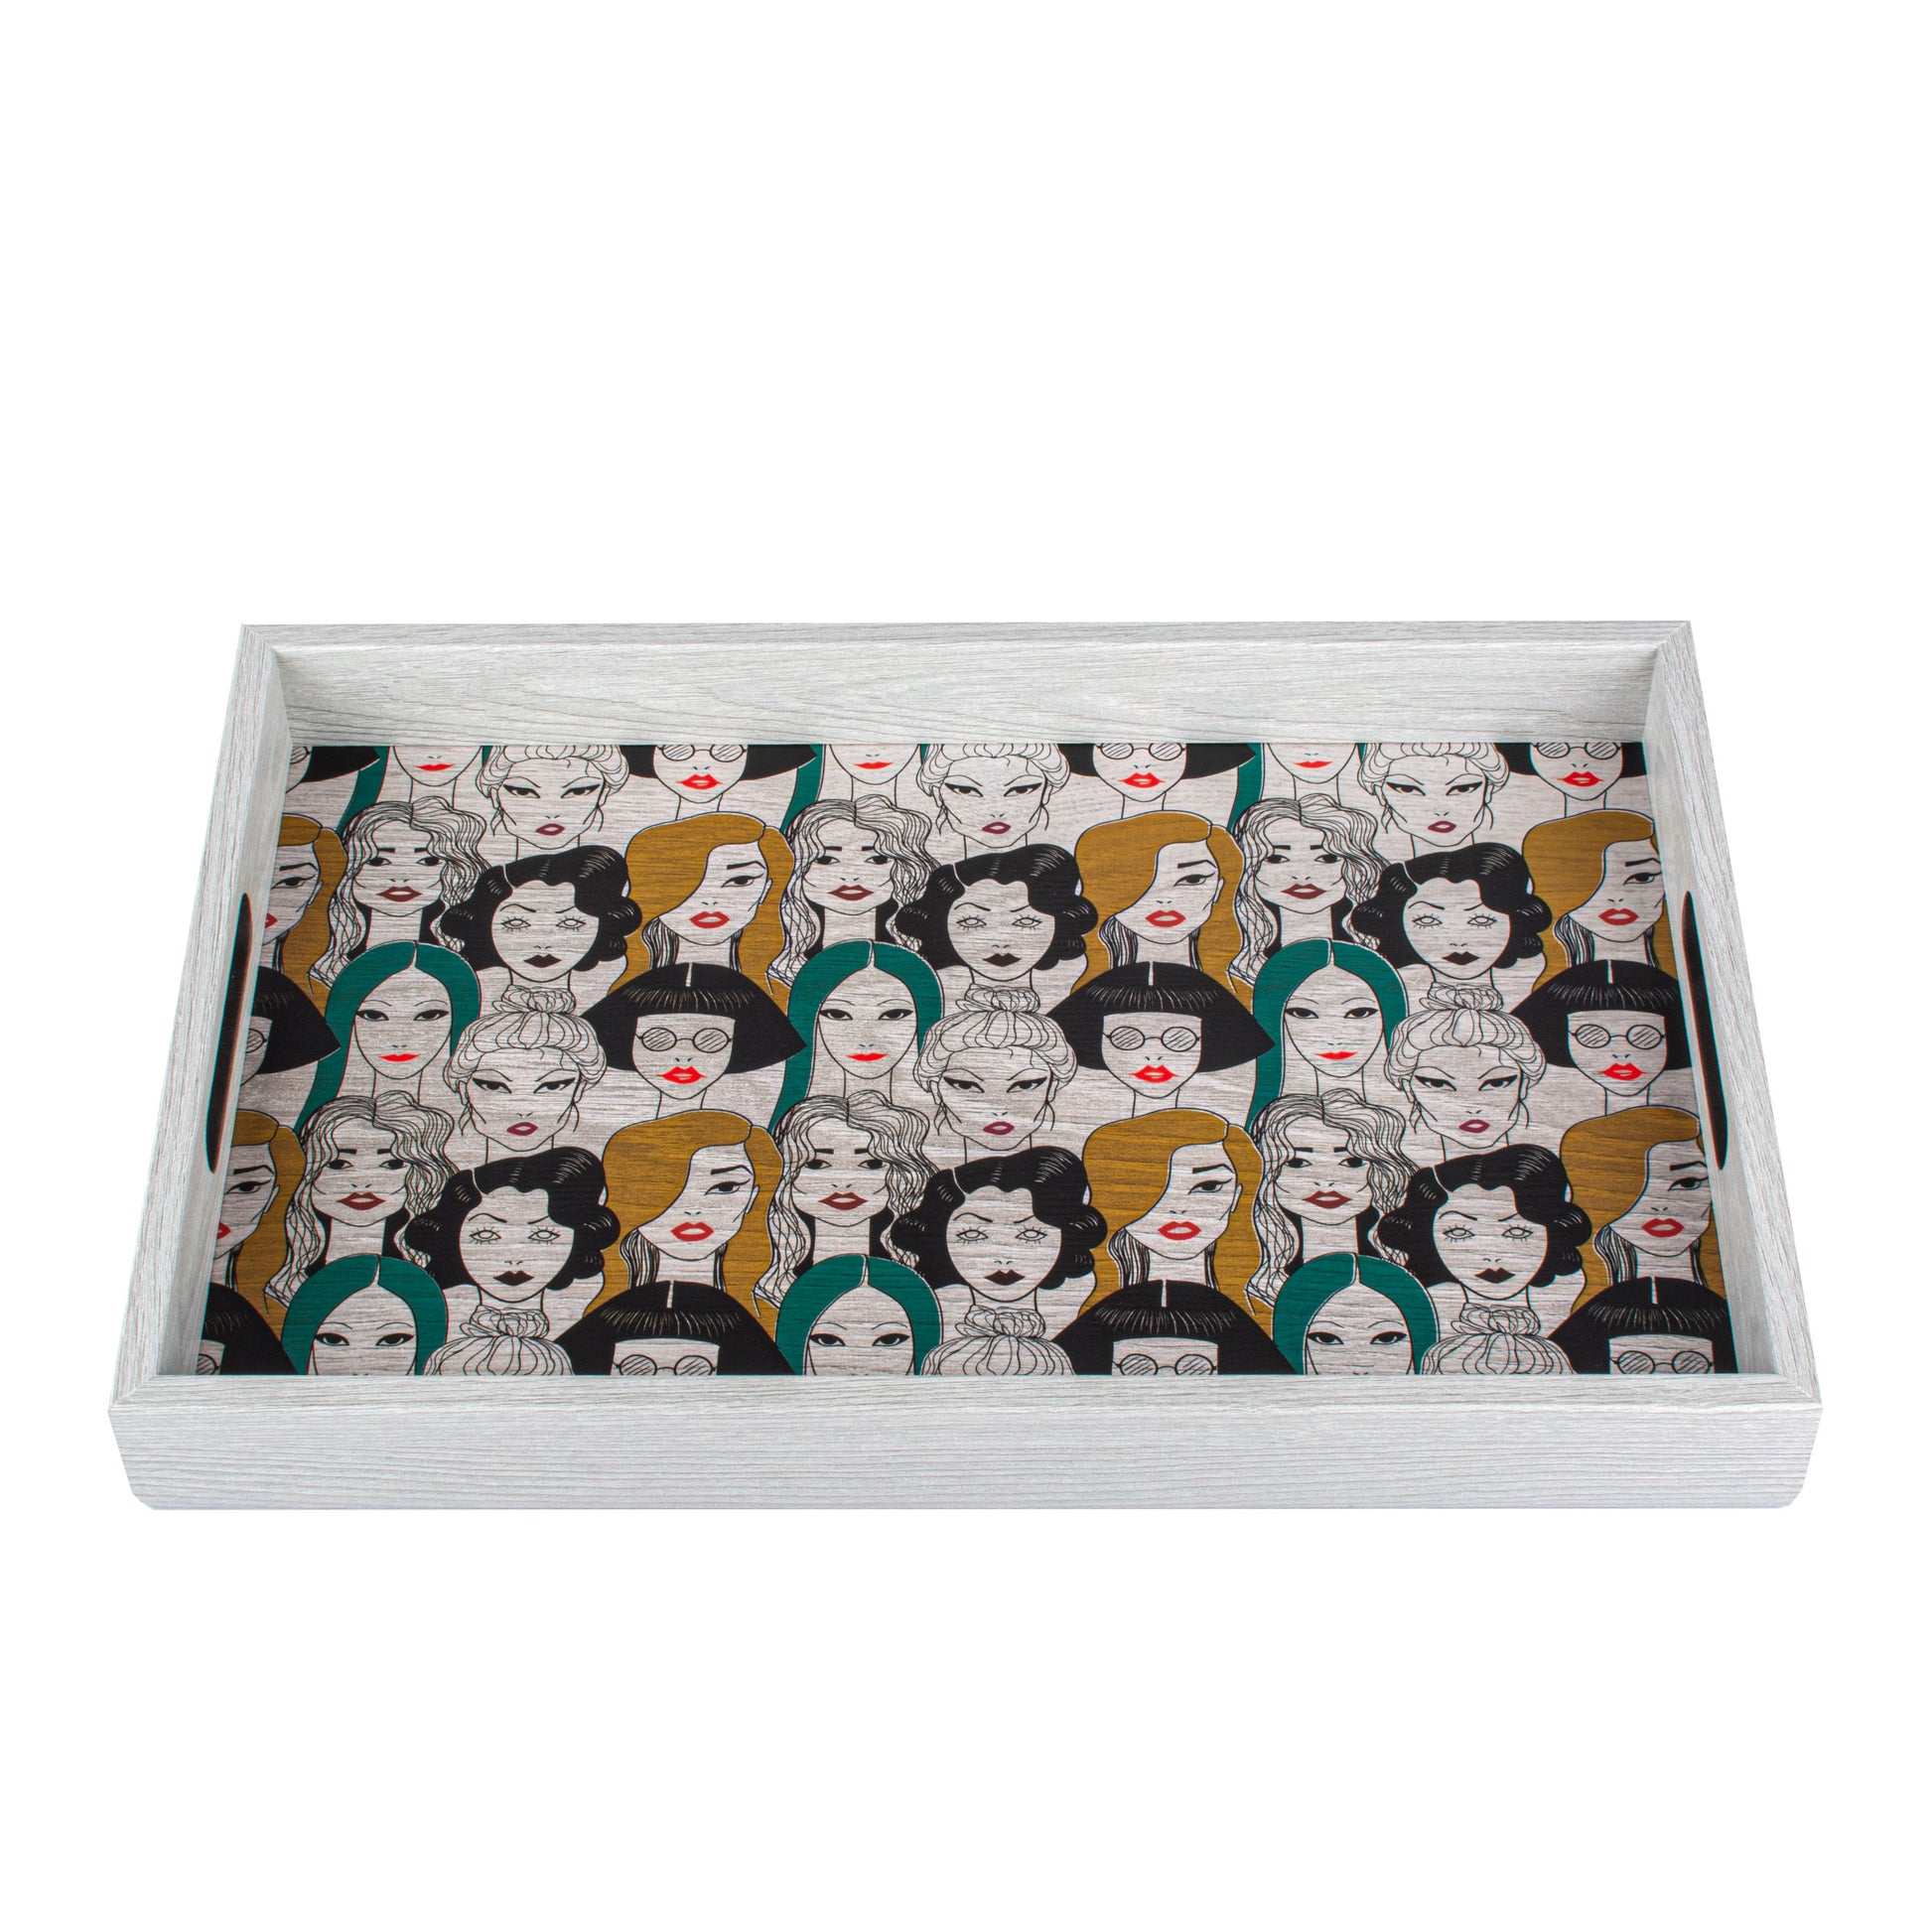 Stylish Wooden Tray with Girls Pop Art Design - Luxury Game Room Decor - Premium Decorative Objects from MANOPOULOS Chess & Backgammon - Just €25! Shop now at MANOPOULOS Chess & Backgammon